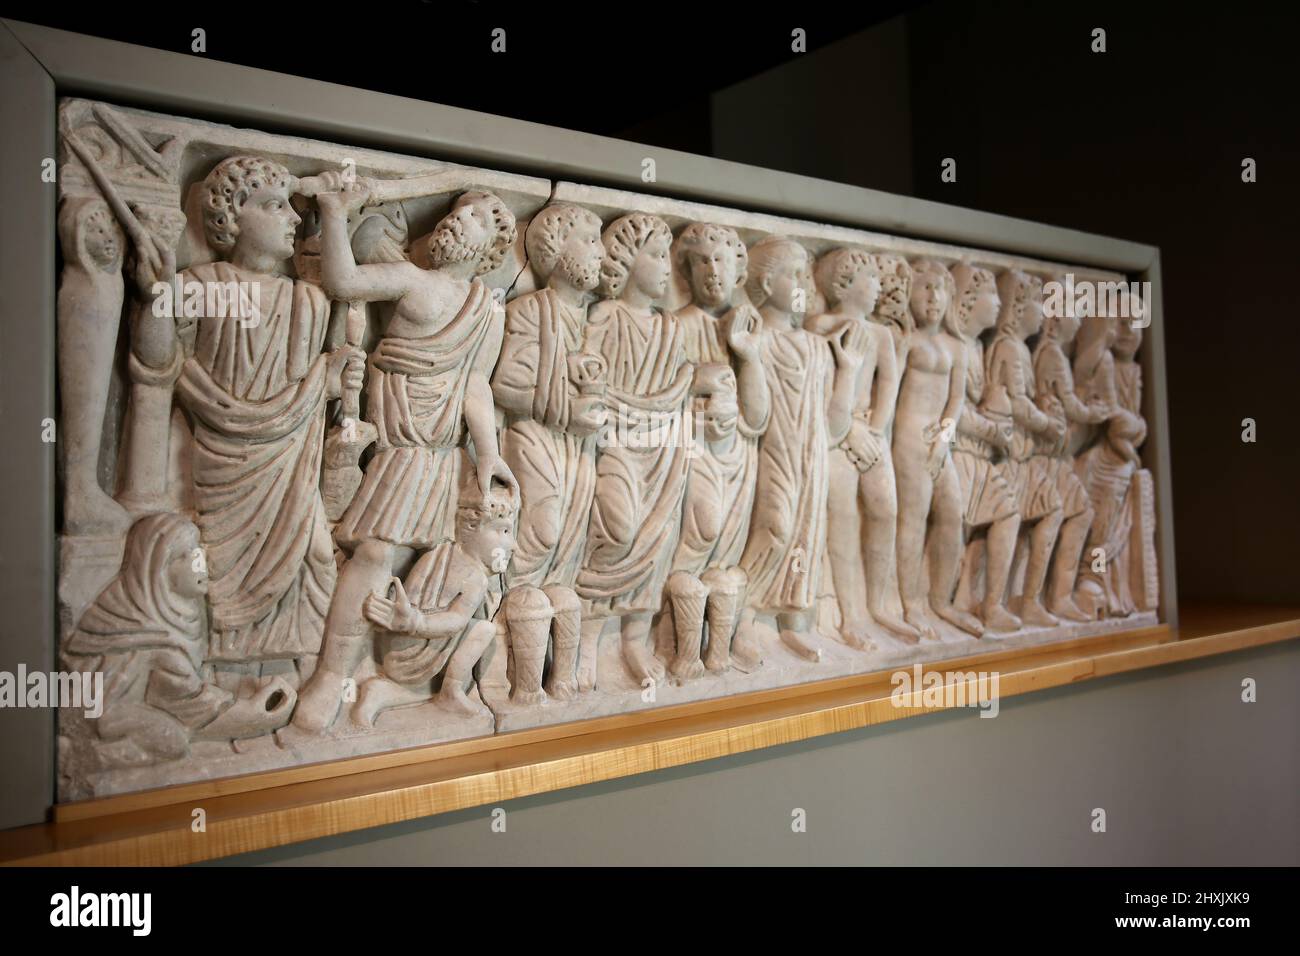 Front panel the sarcophagus with biblical scenes. Carced in a Roman workshop, 4th c. AD. Frederic Mares Museum. Barcelona, Spain. Stock Photo